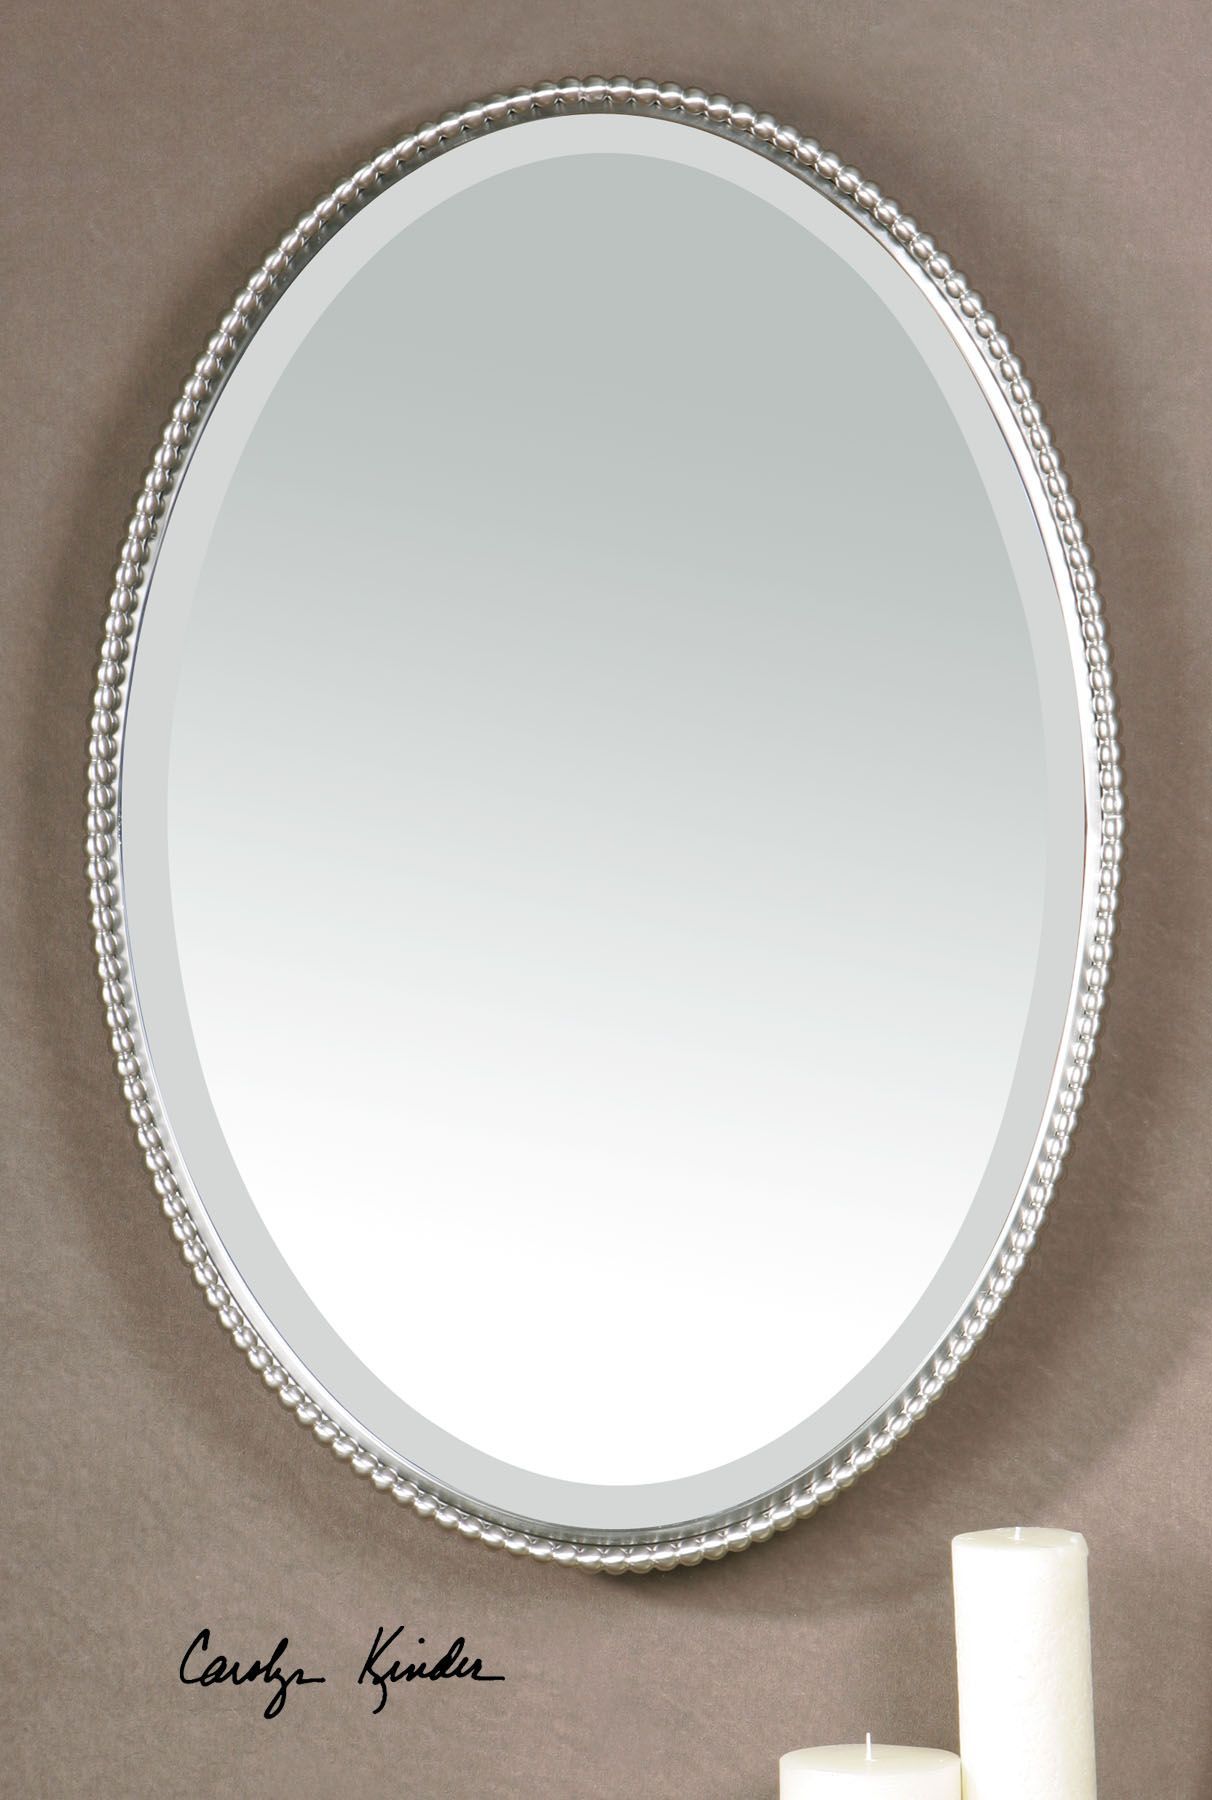 Silver Nickel Beaded Edge Oval Wall Mirror 32" Vanity Bathroom Horchow For Round Beaded Trim Wall Mirrors (View 2 of 15)